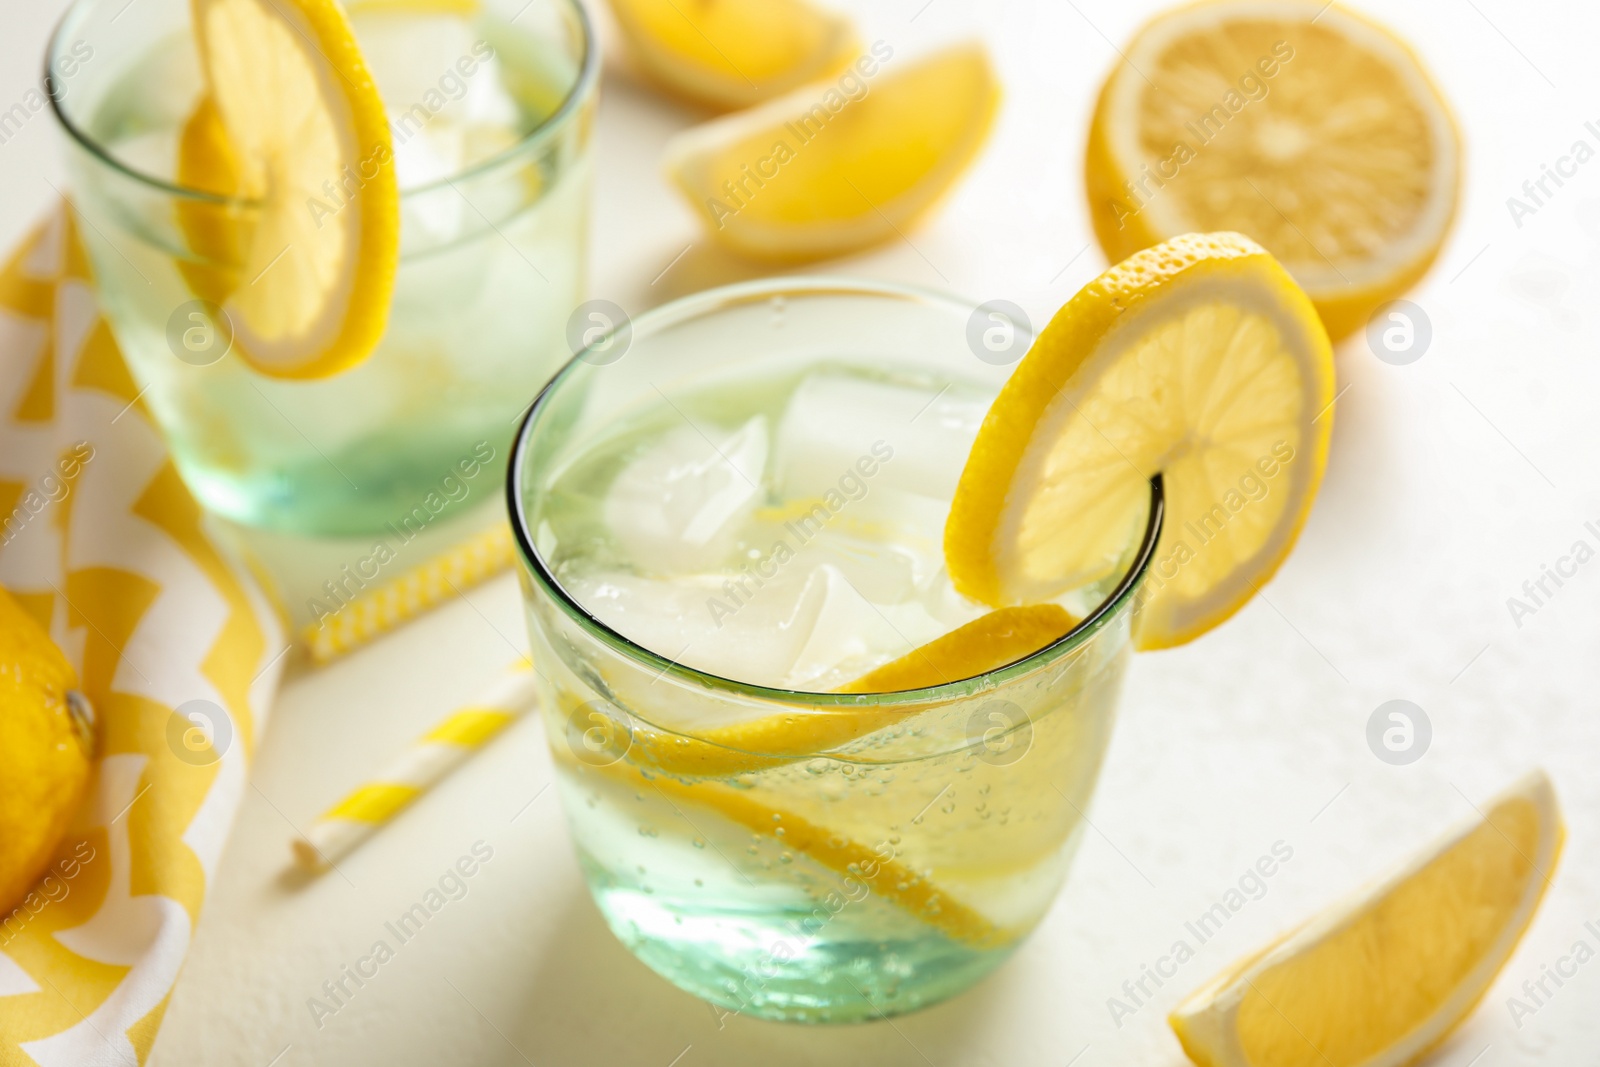 Photo of Soda water with lemon slices and ice cubes on white table